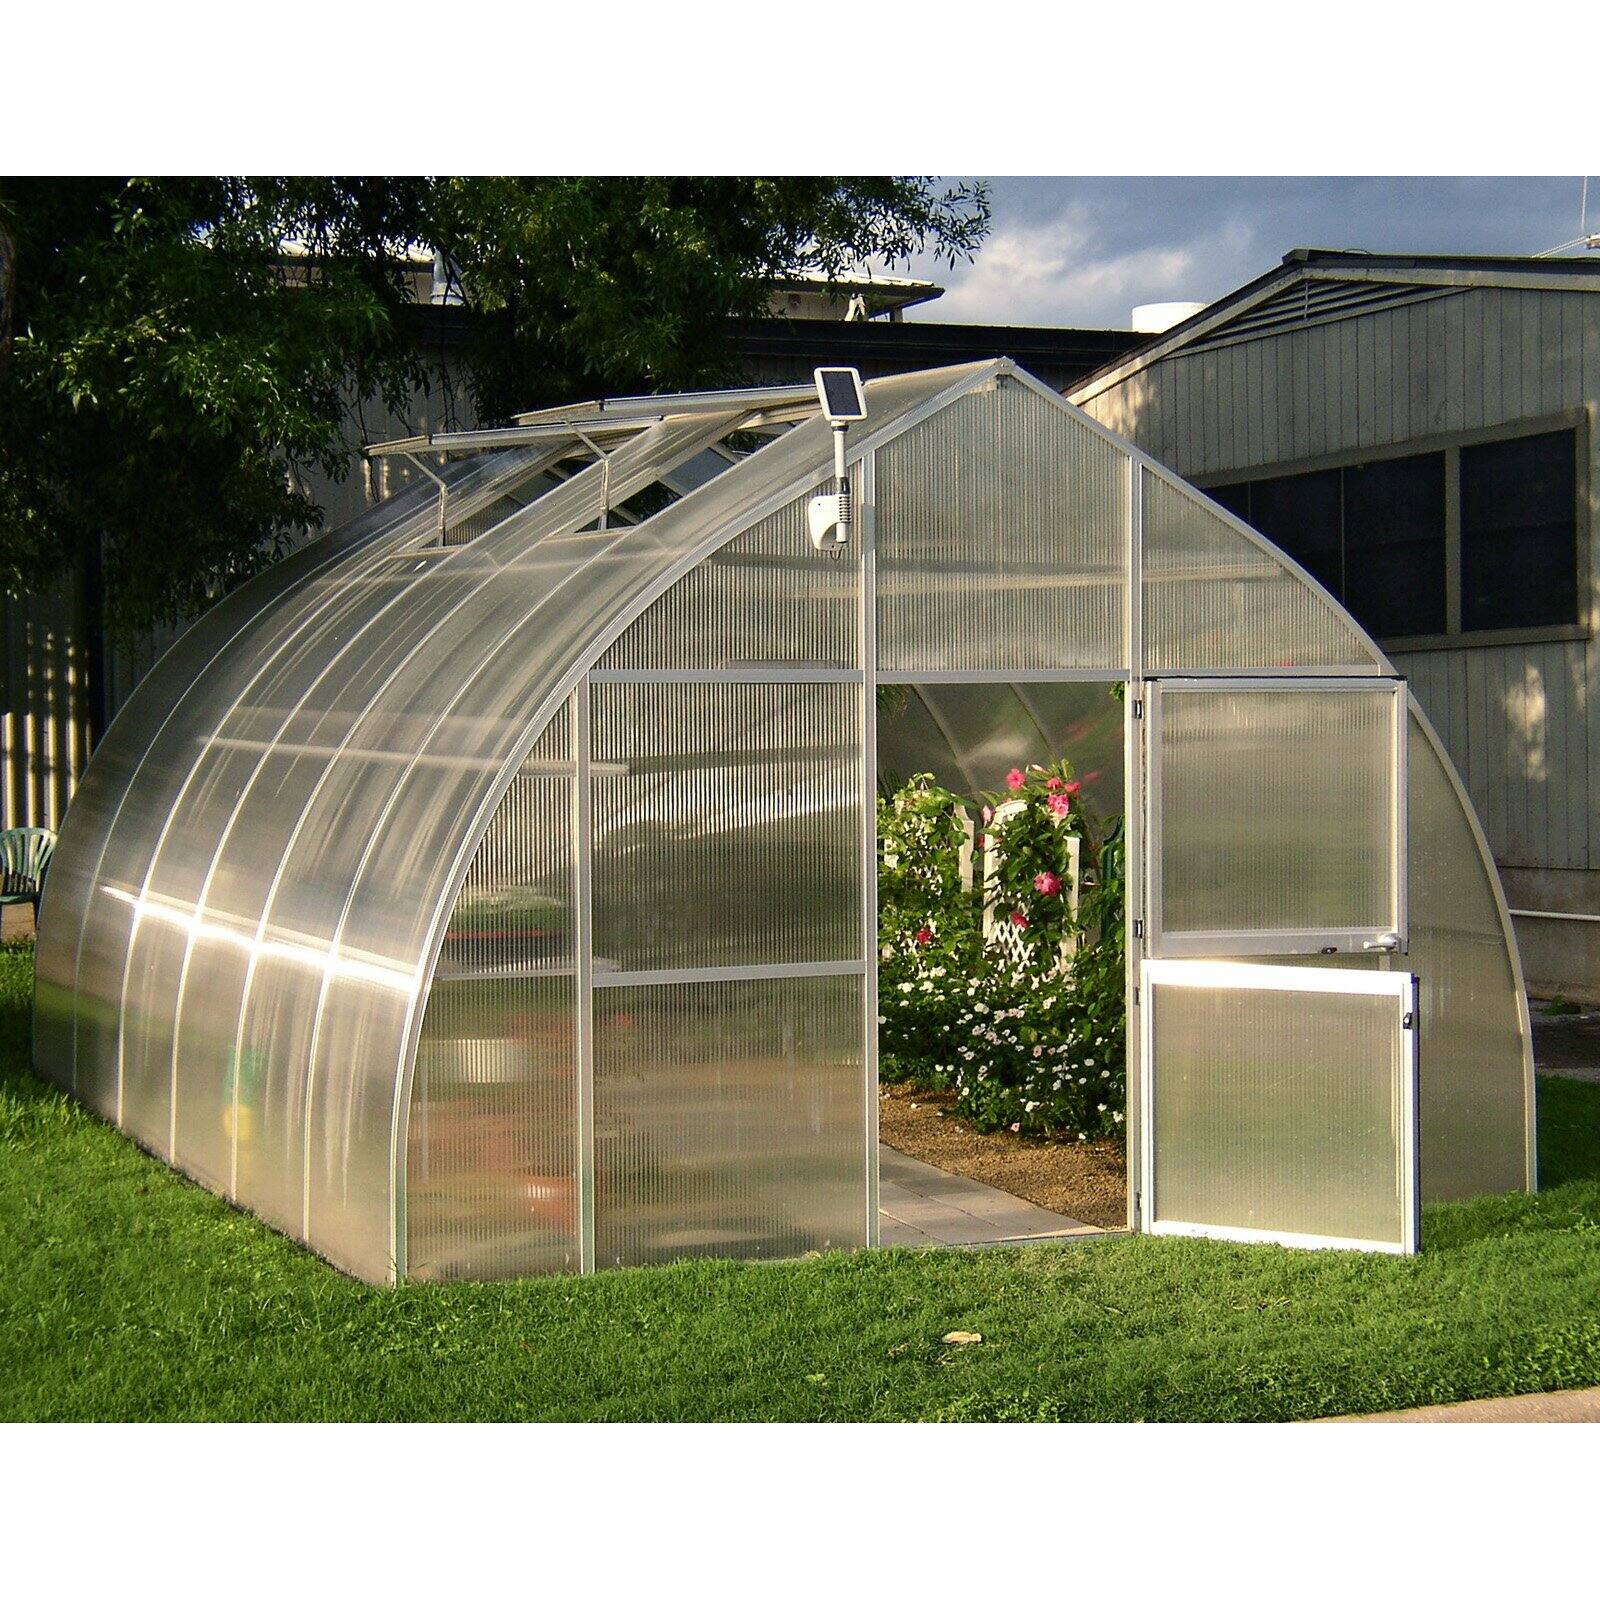 Greenhouse Accessories - Light My Shed IV™ Solar Powered LED Light